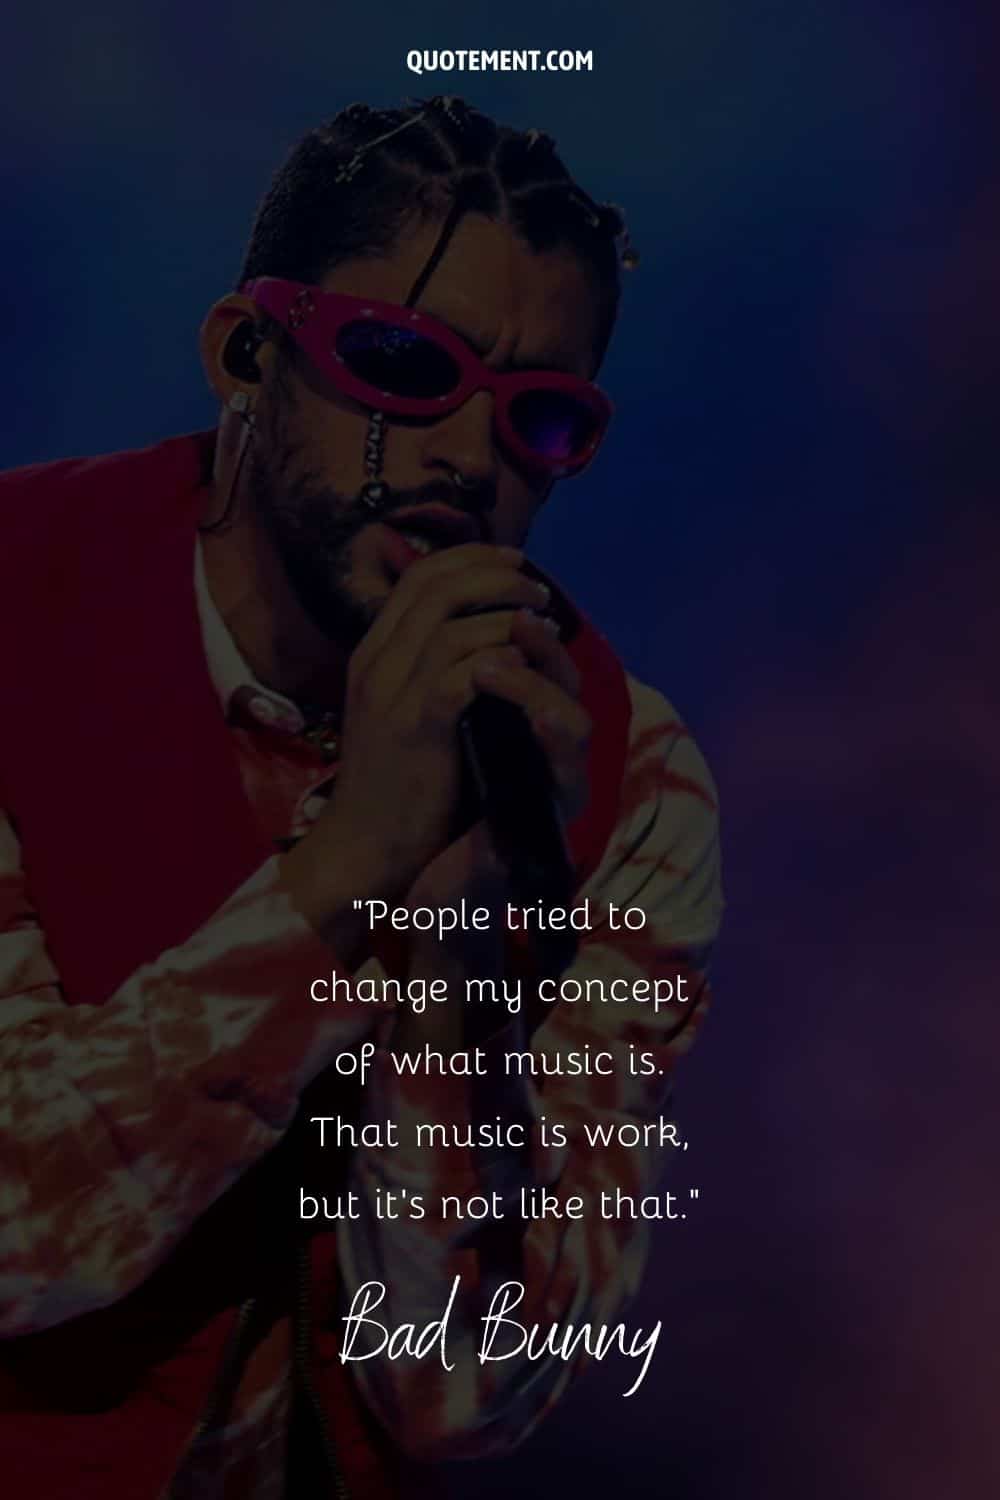 bad bunny with red sunglasses and microphone